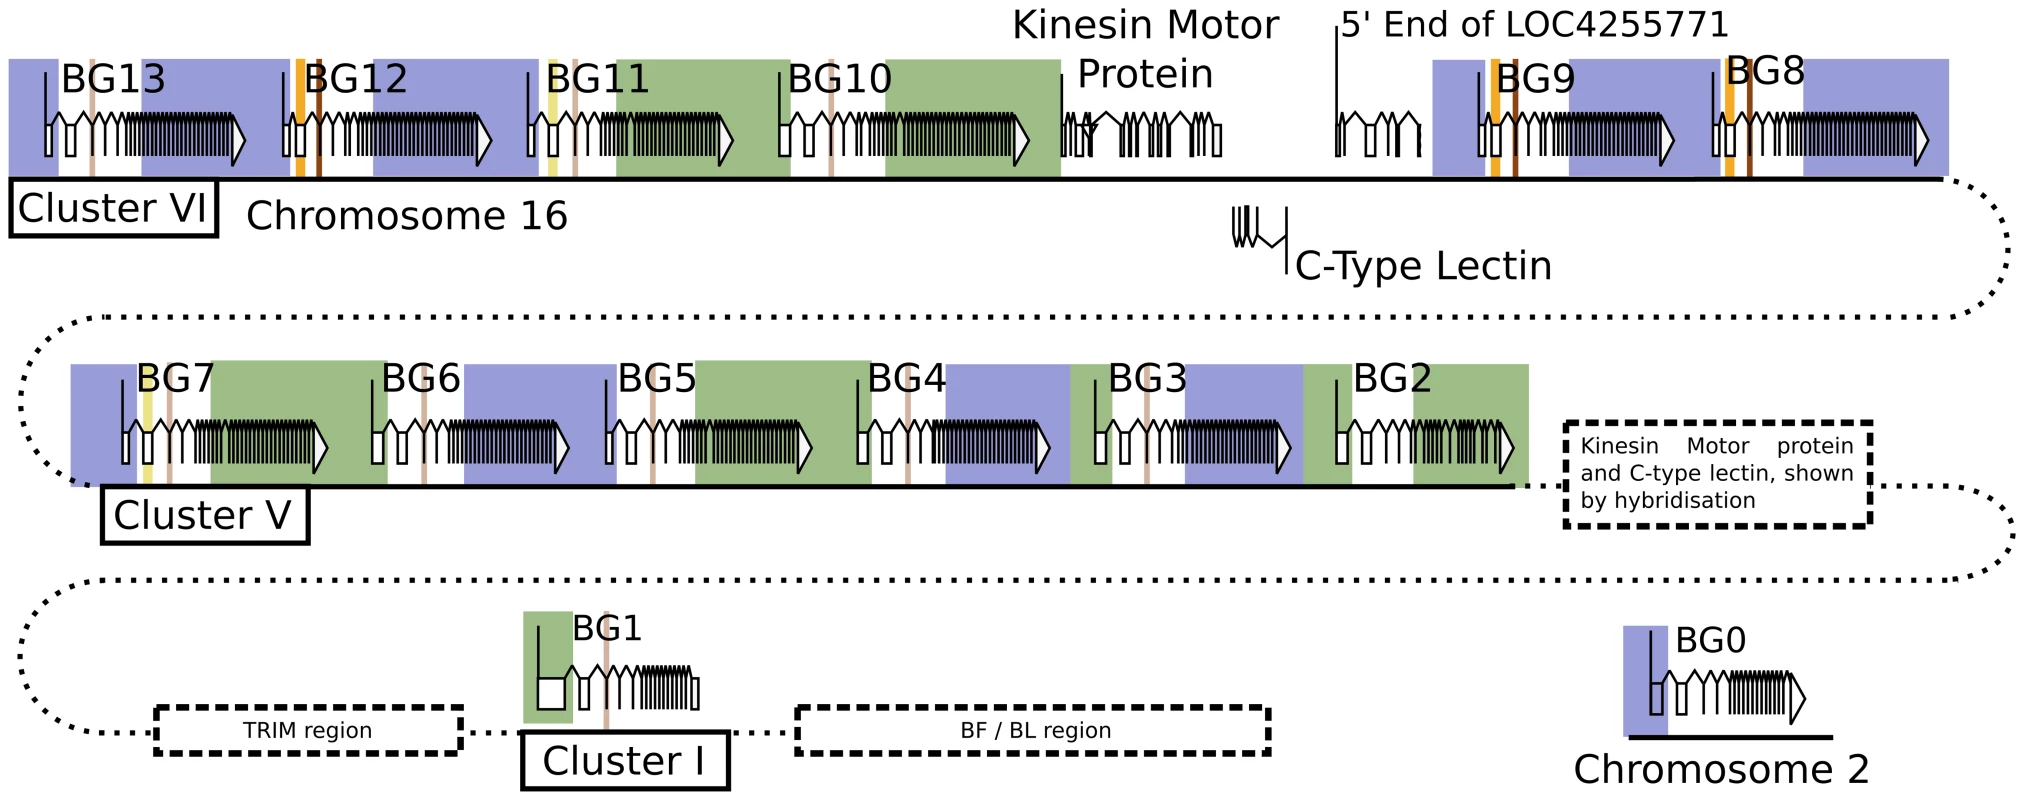 The presence of hybrid BG genes in the B12 haplotype shows no obvious pattern, consistent with a random process of recombination in the centre of the genes.